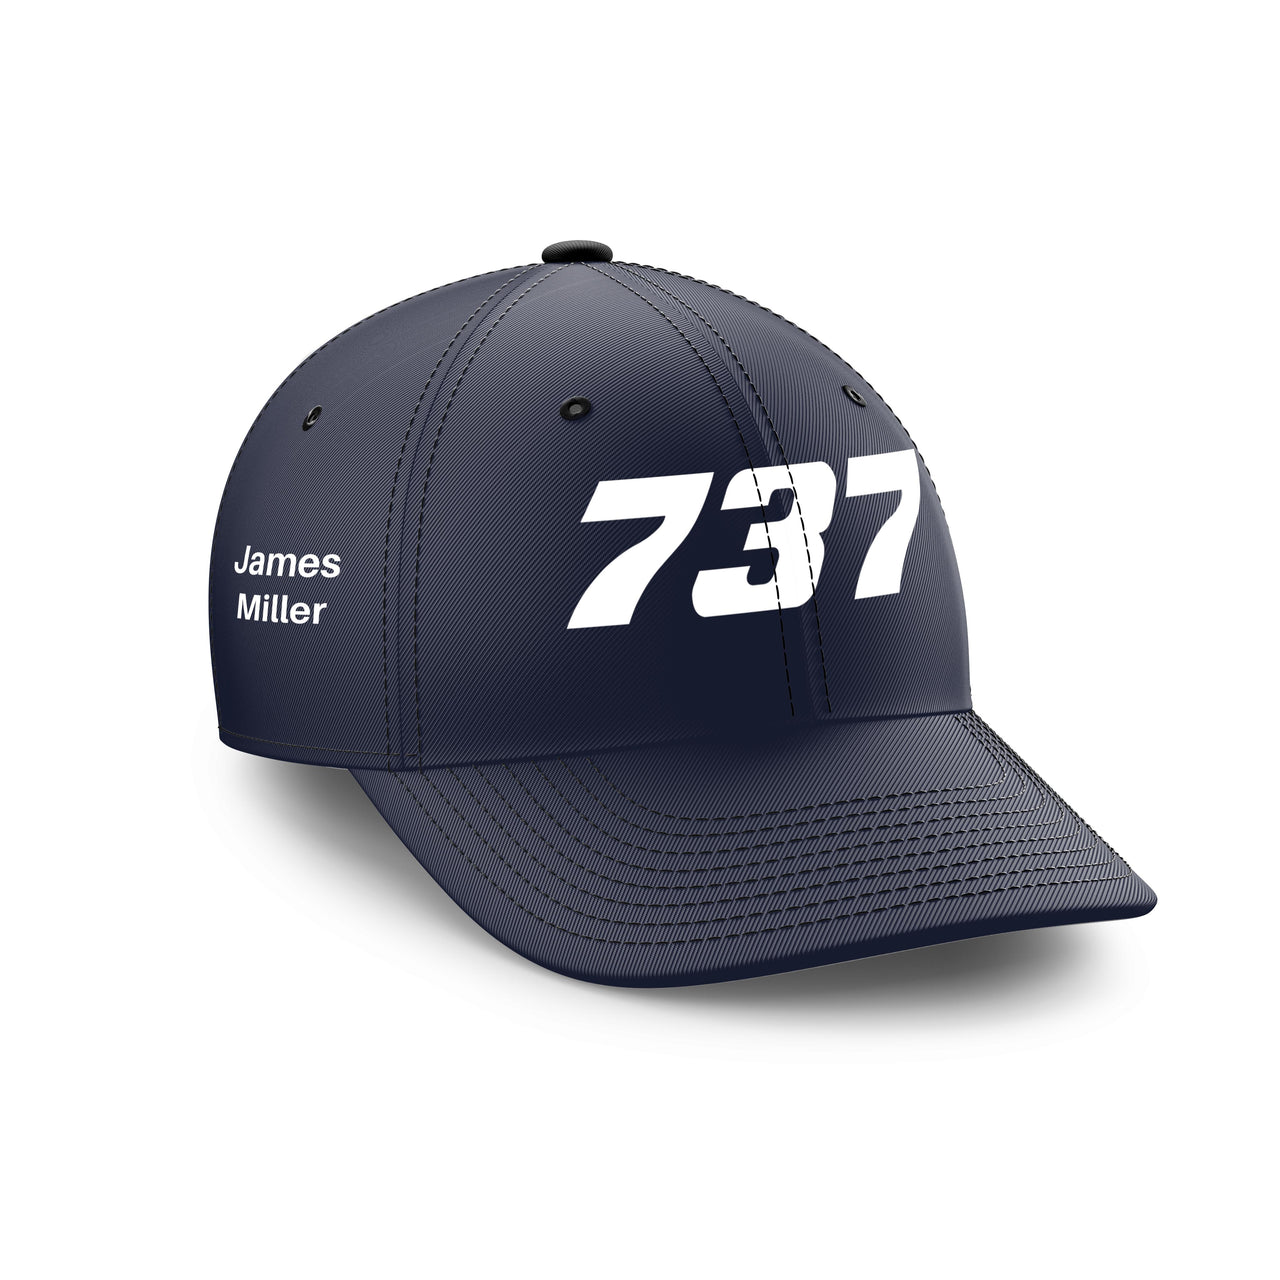 Customizable Name & 737 Flat Text Embroidered Hats